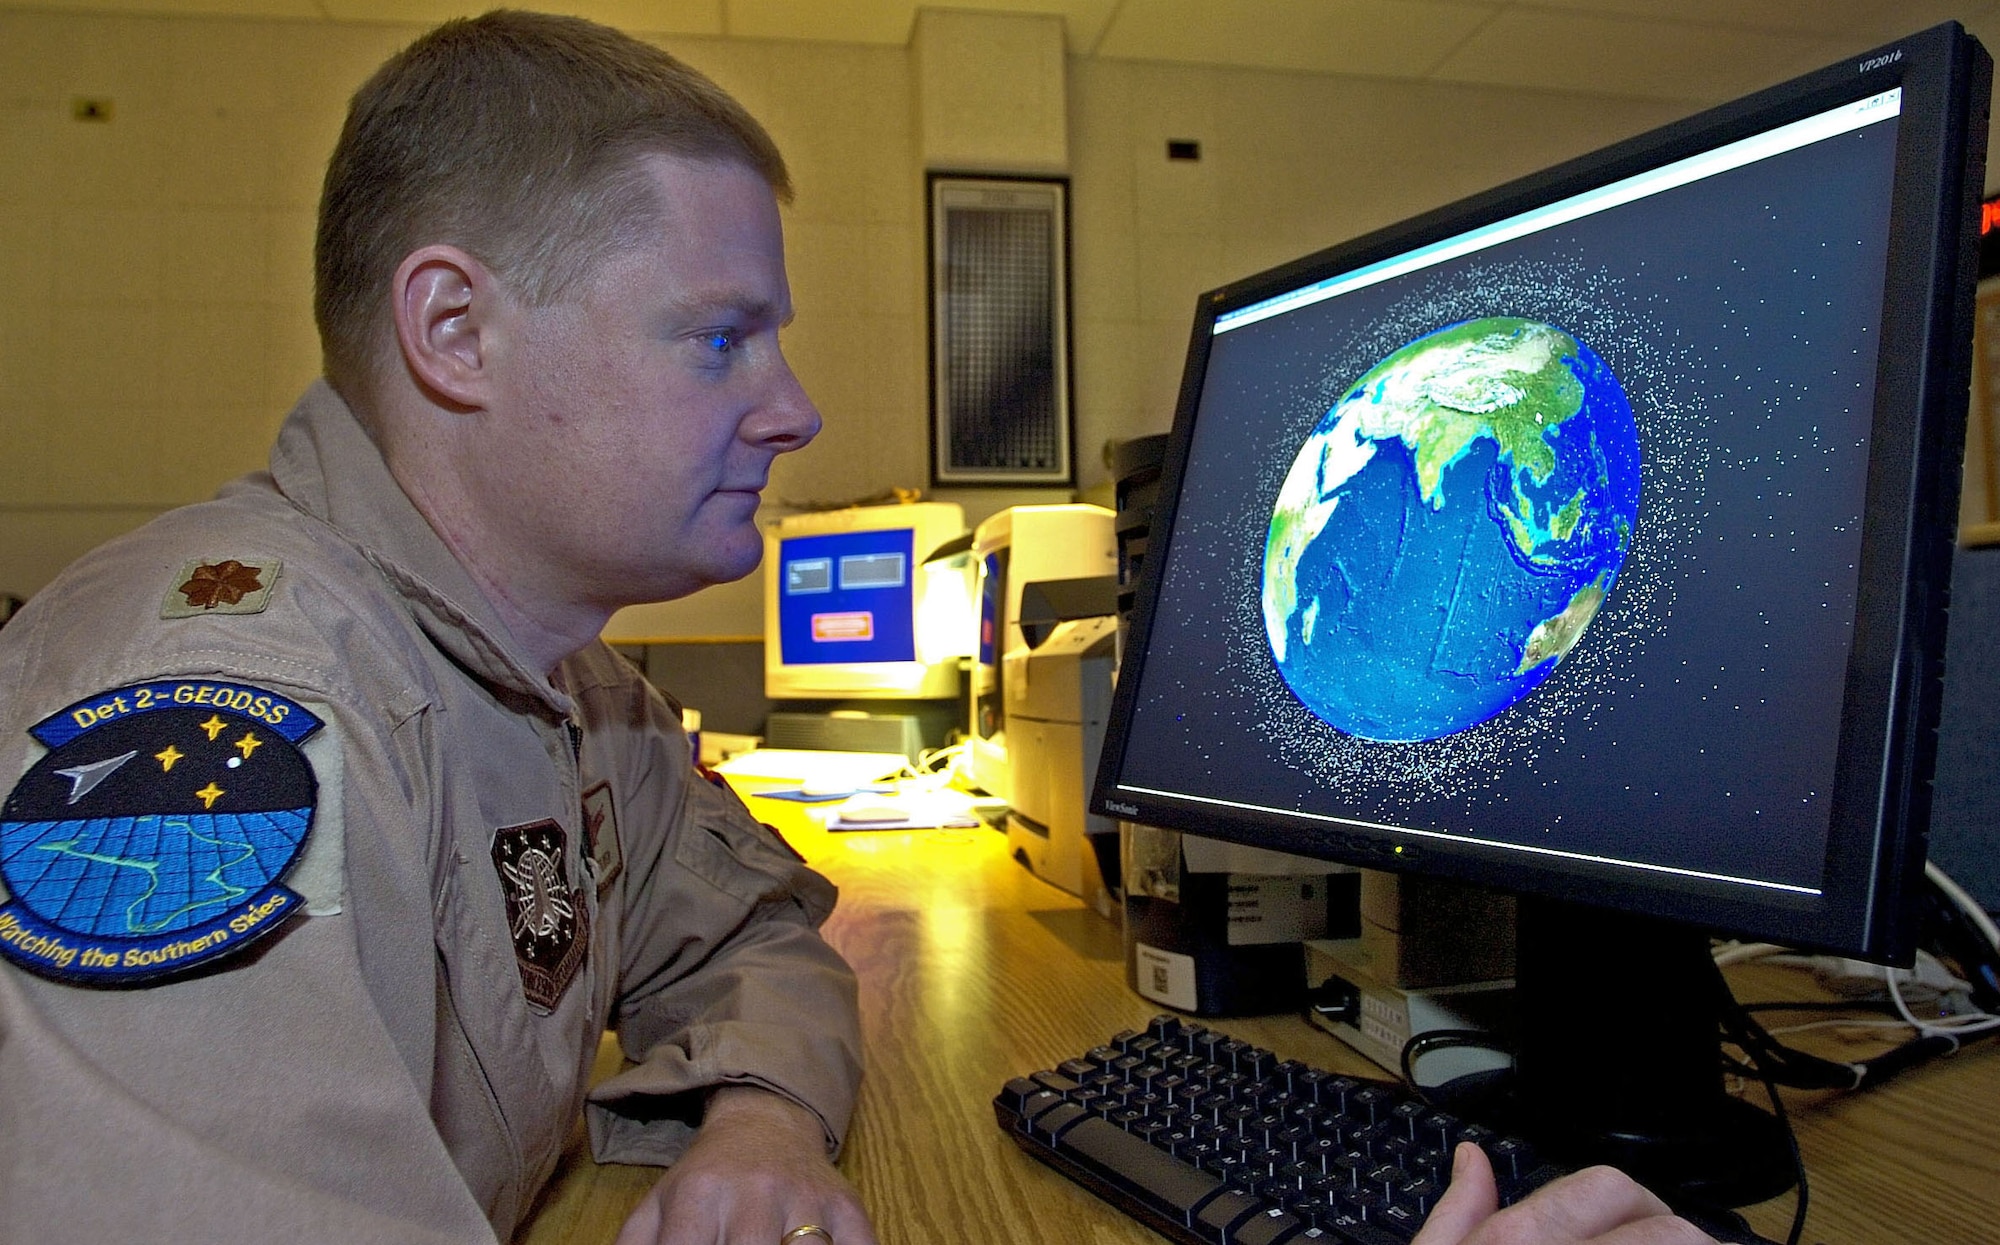 Maj. Jay Fulmer uses space and missile analysis software to track known man-made deep space objects in orbit around Earth. Major Fulmer is commander of Detachment 2 of the Ground-Based Electro-Optical Deep Space Surveillance System in Southwest Asia. (U.S. Air Force photo/Senior Master Sgt. John Rohrer)
